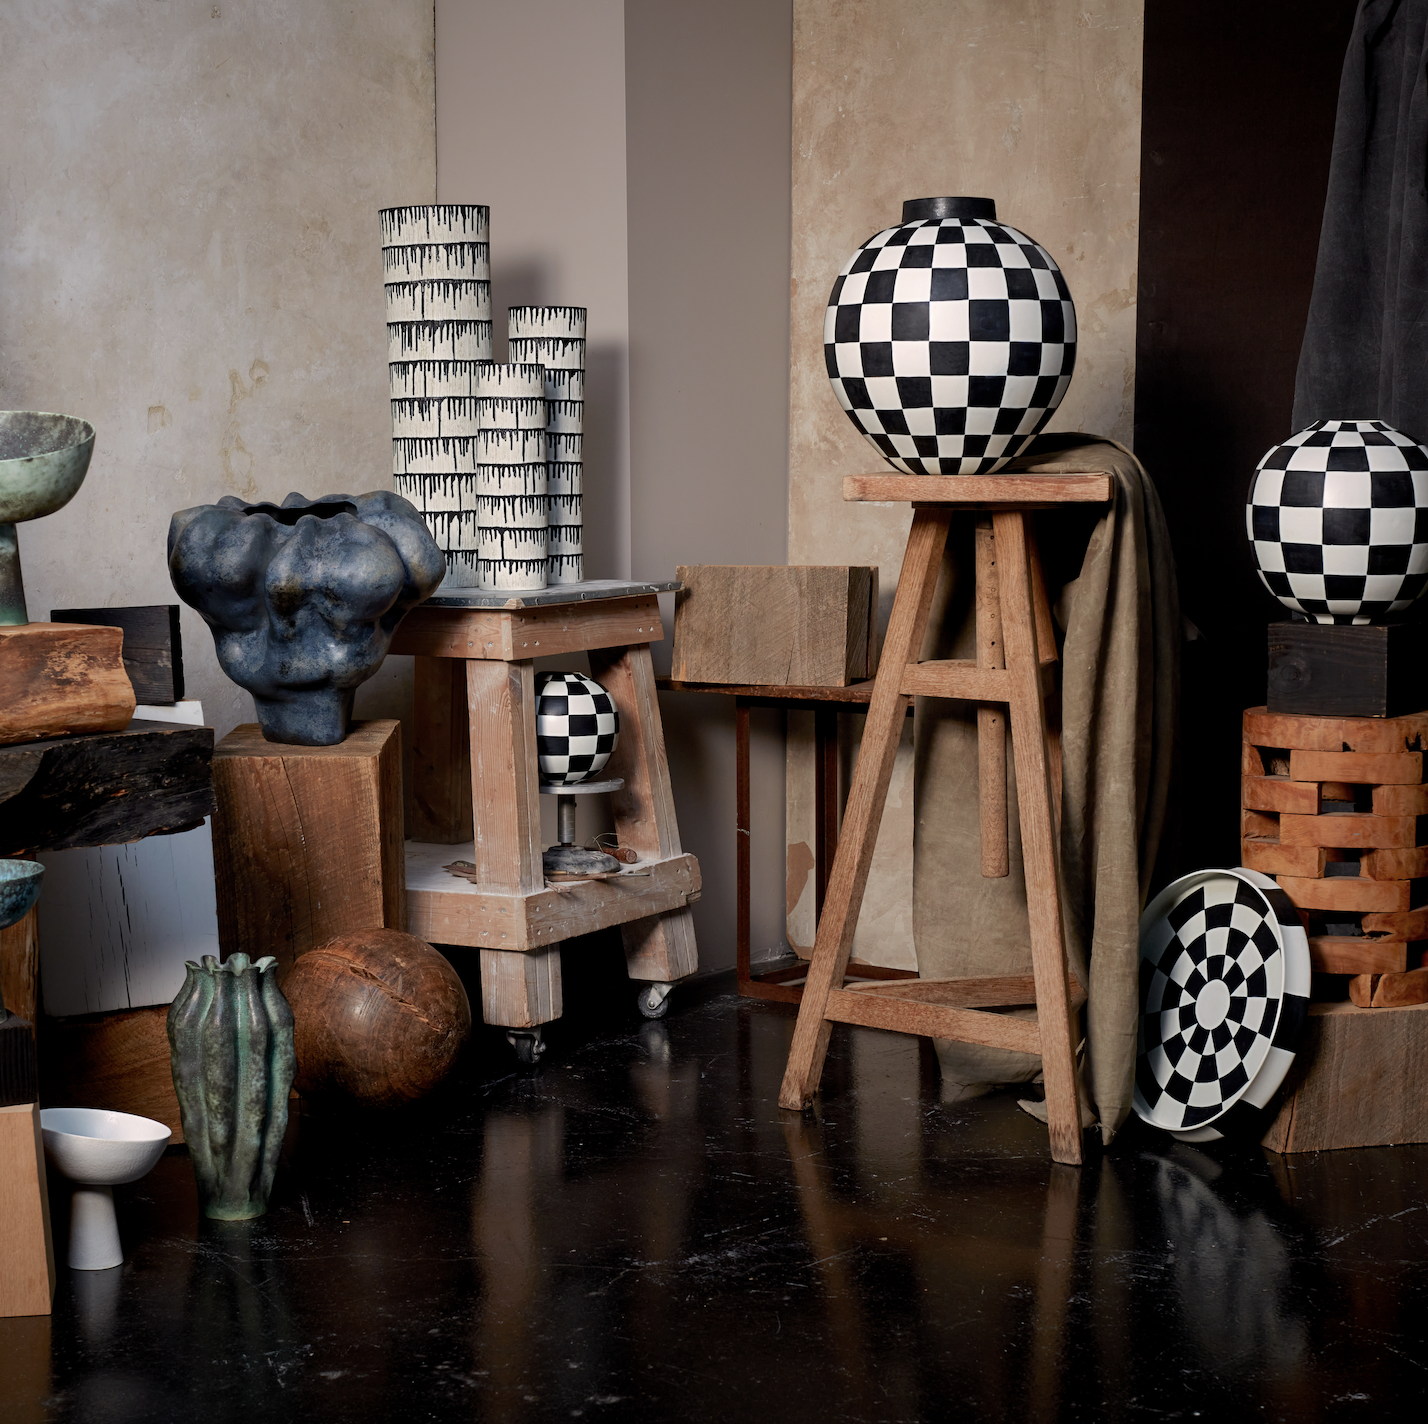 In Paris, L'Objet Unveils a Collection Inspired by Its Artisans